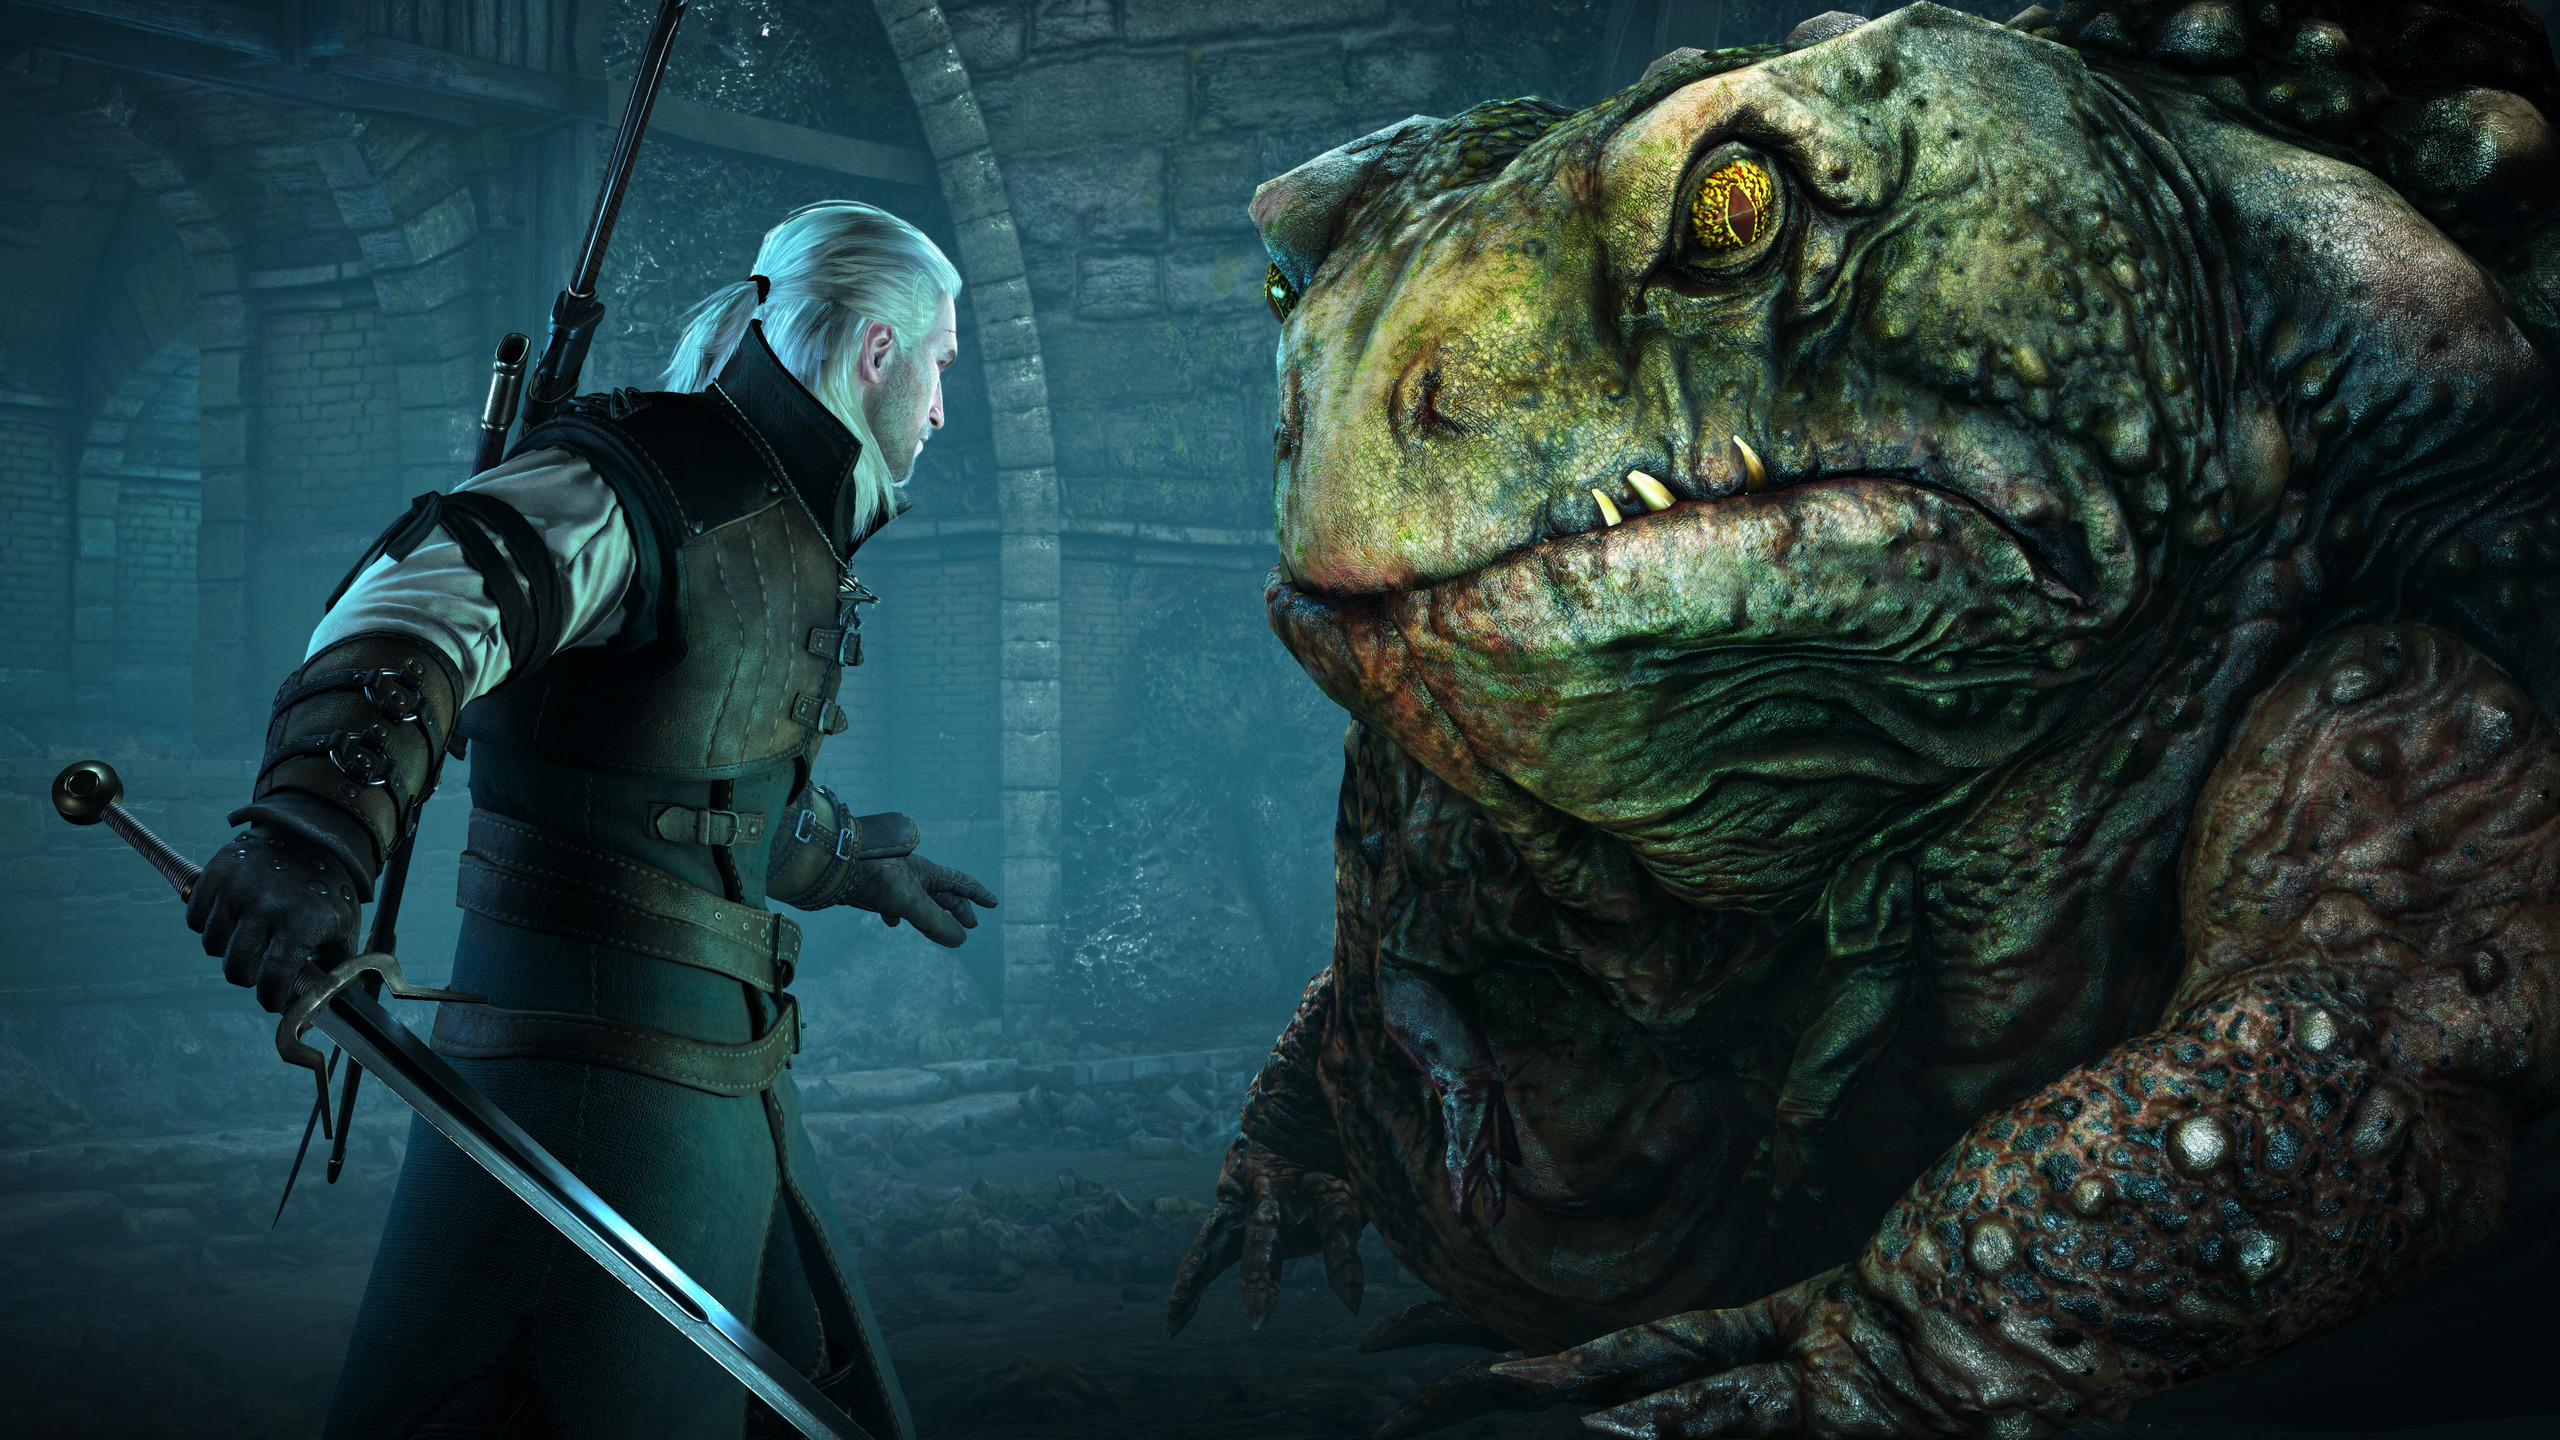 Geralt Of Rivia, Toad King, The Witcher, The Witcher 3: Wild Hunt, PC Gaming, DLC, Video Games Wallpaper